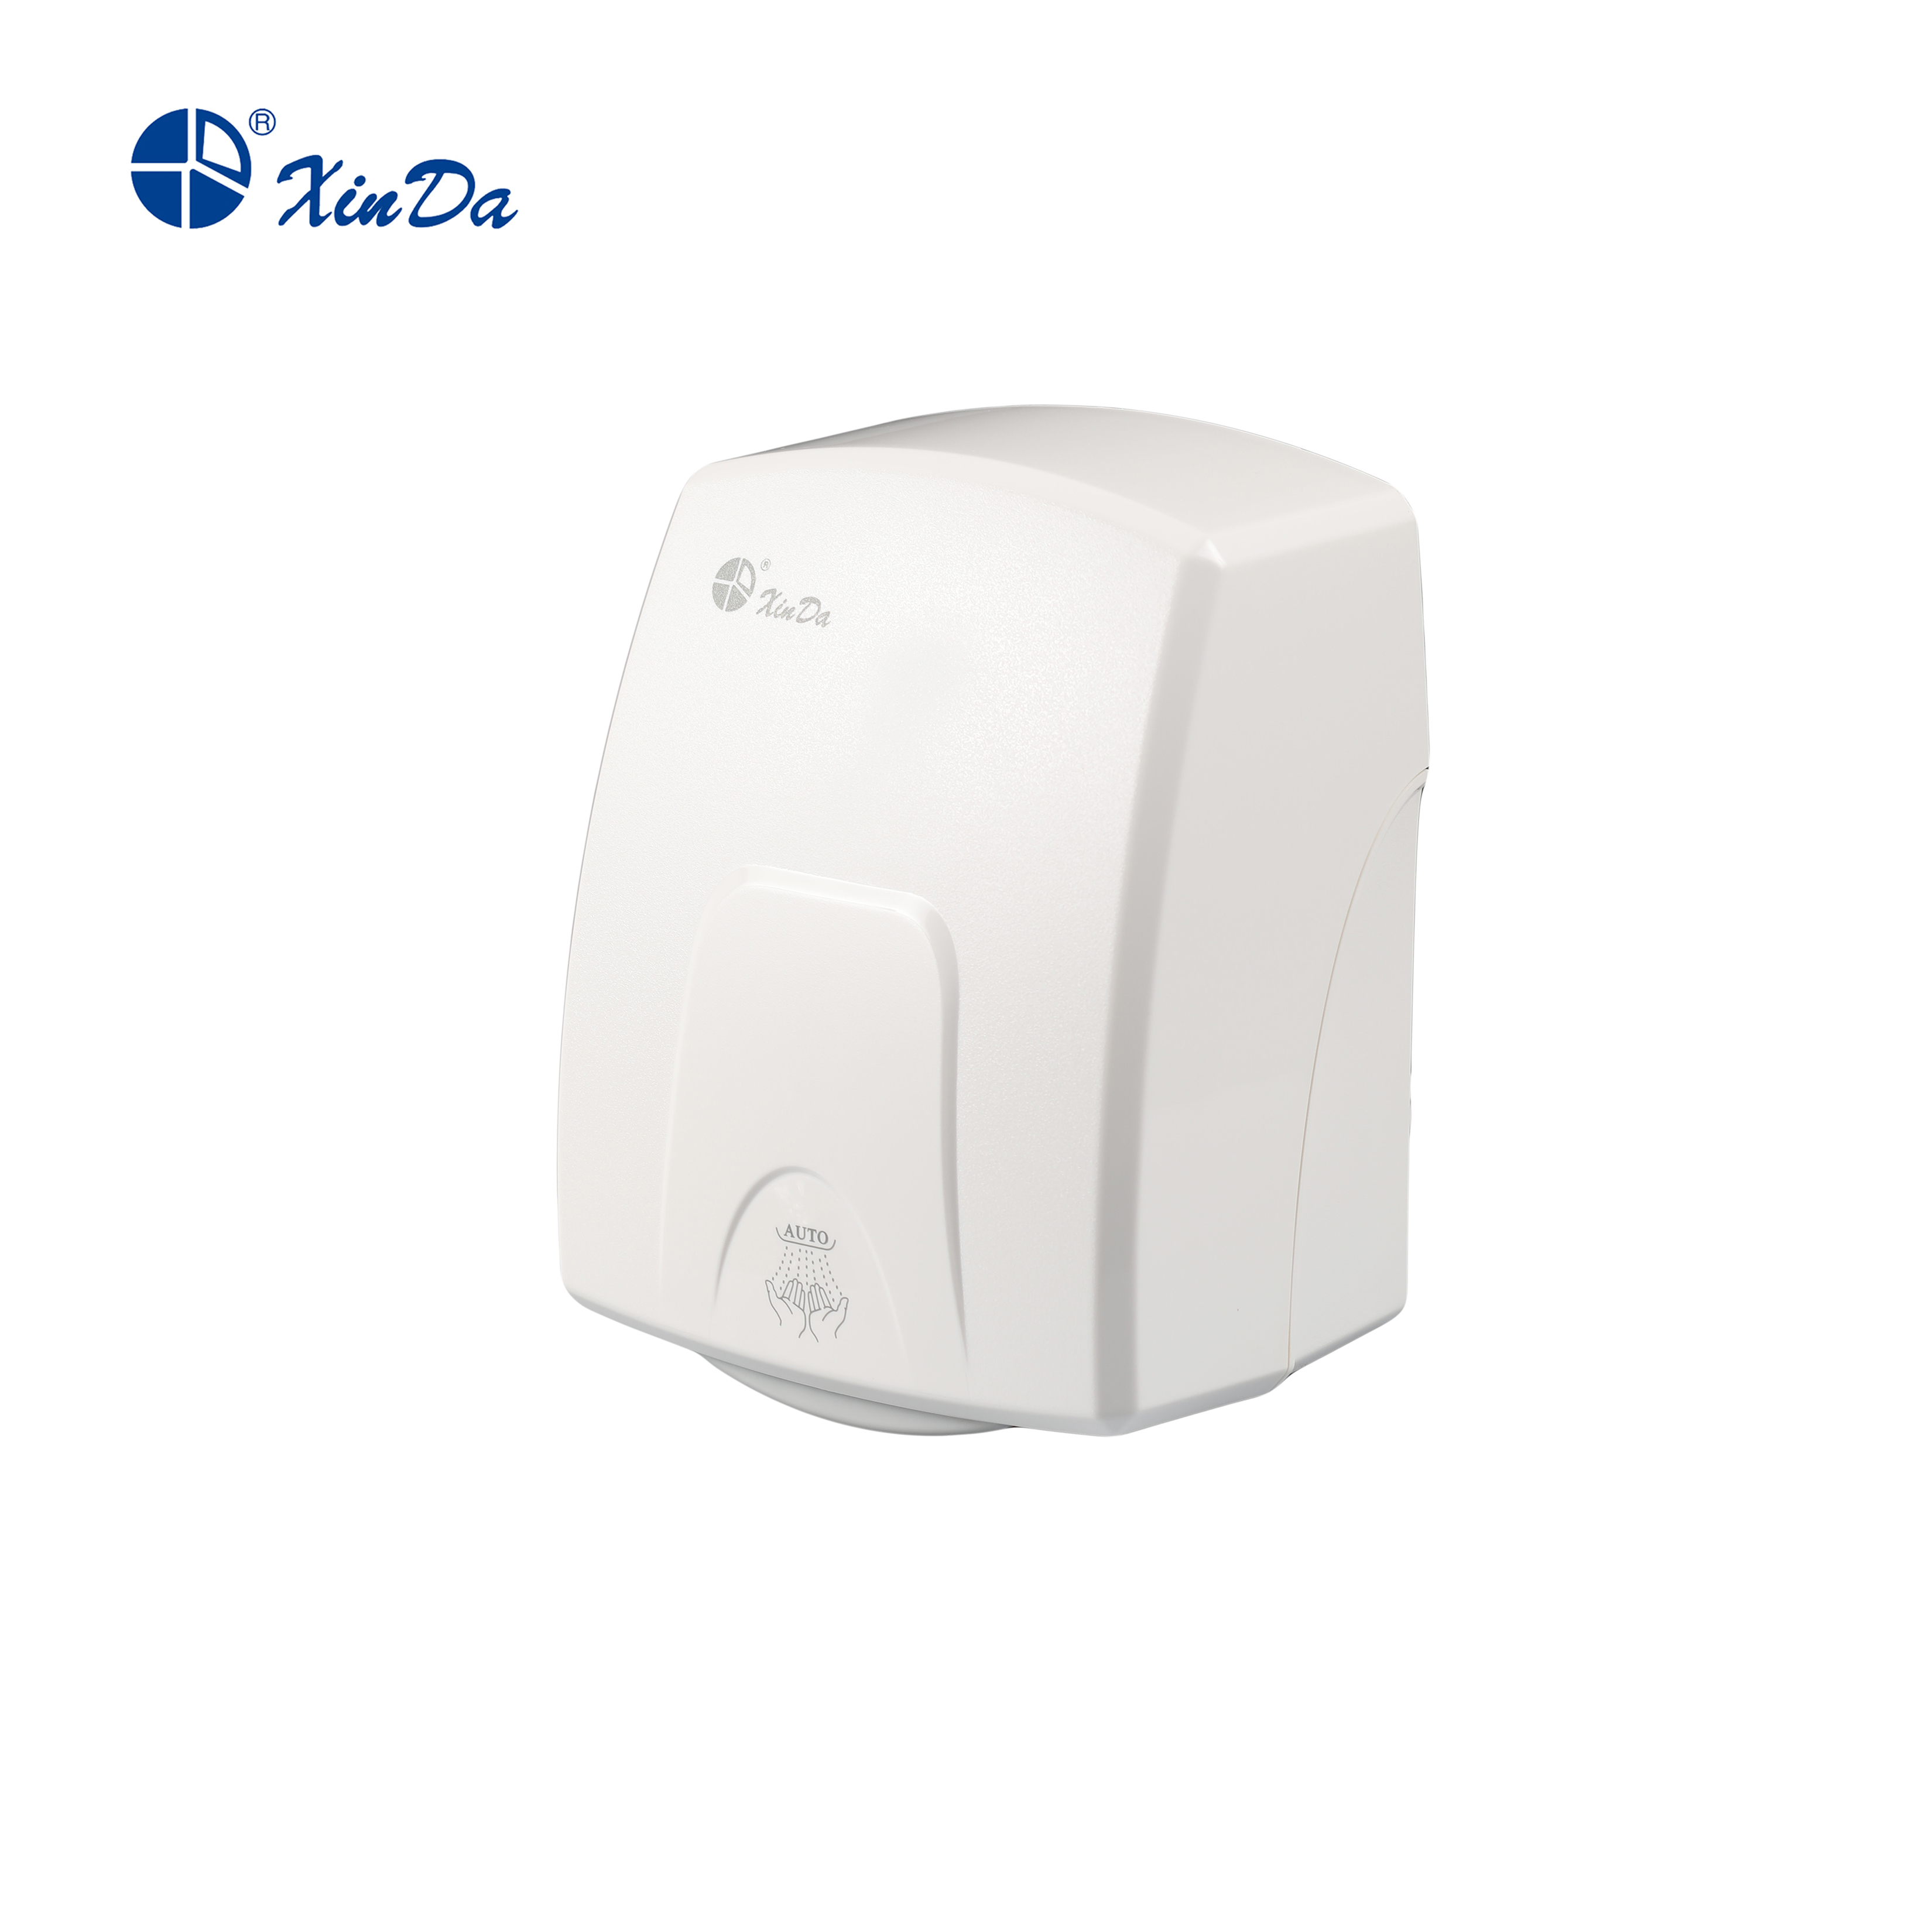 Auto Touchless Automatic Sensor Jet Air Blade Hand Dryer for Toilet